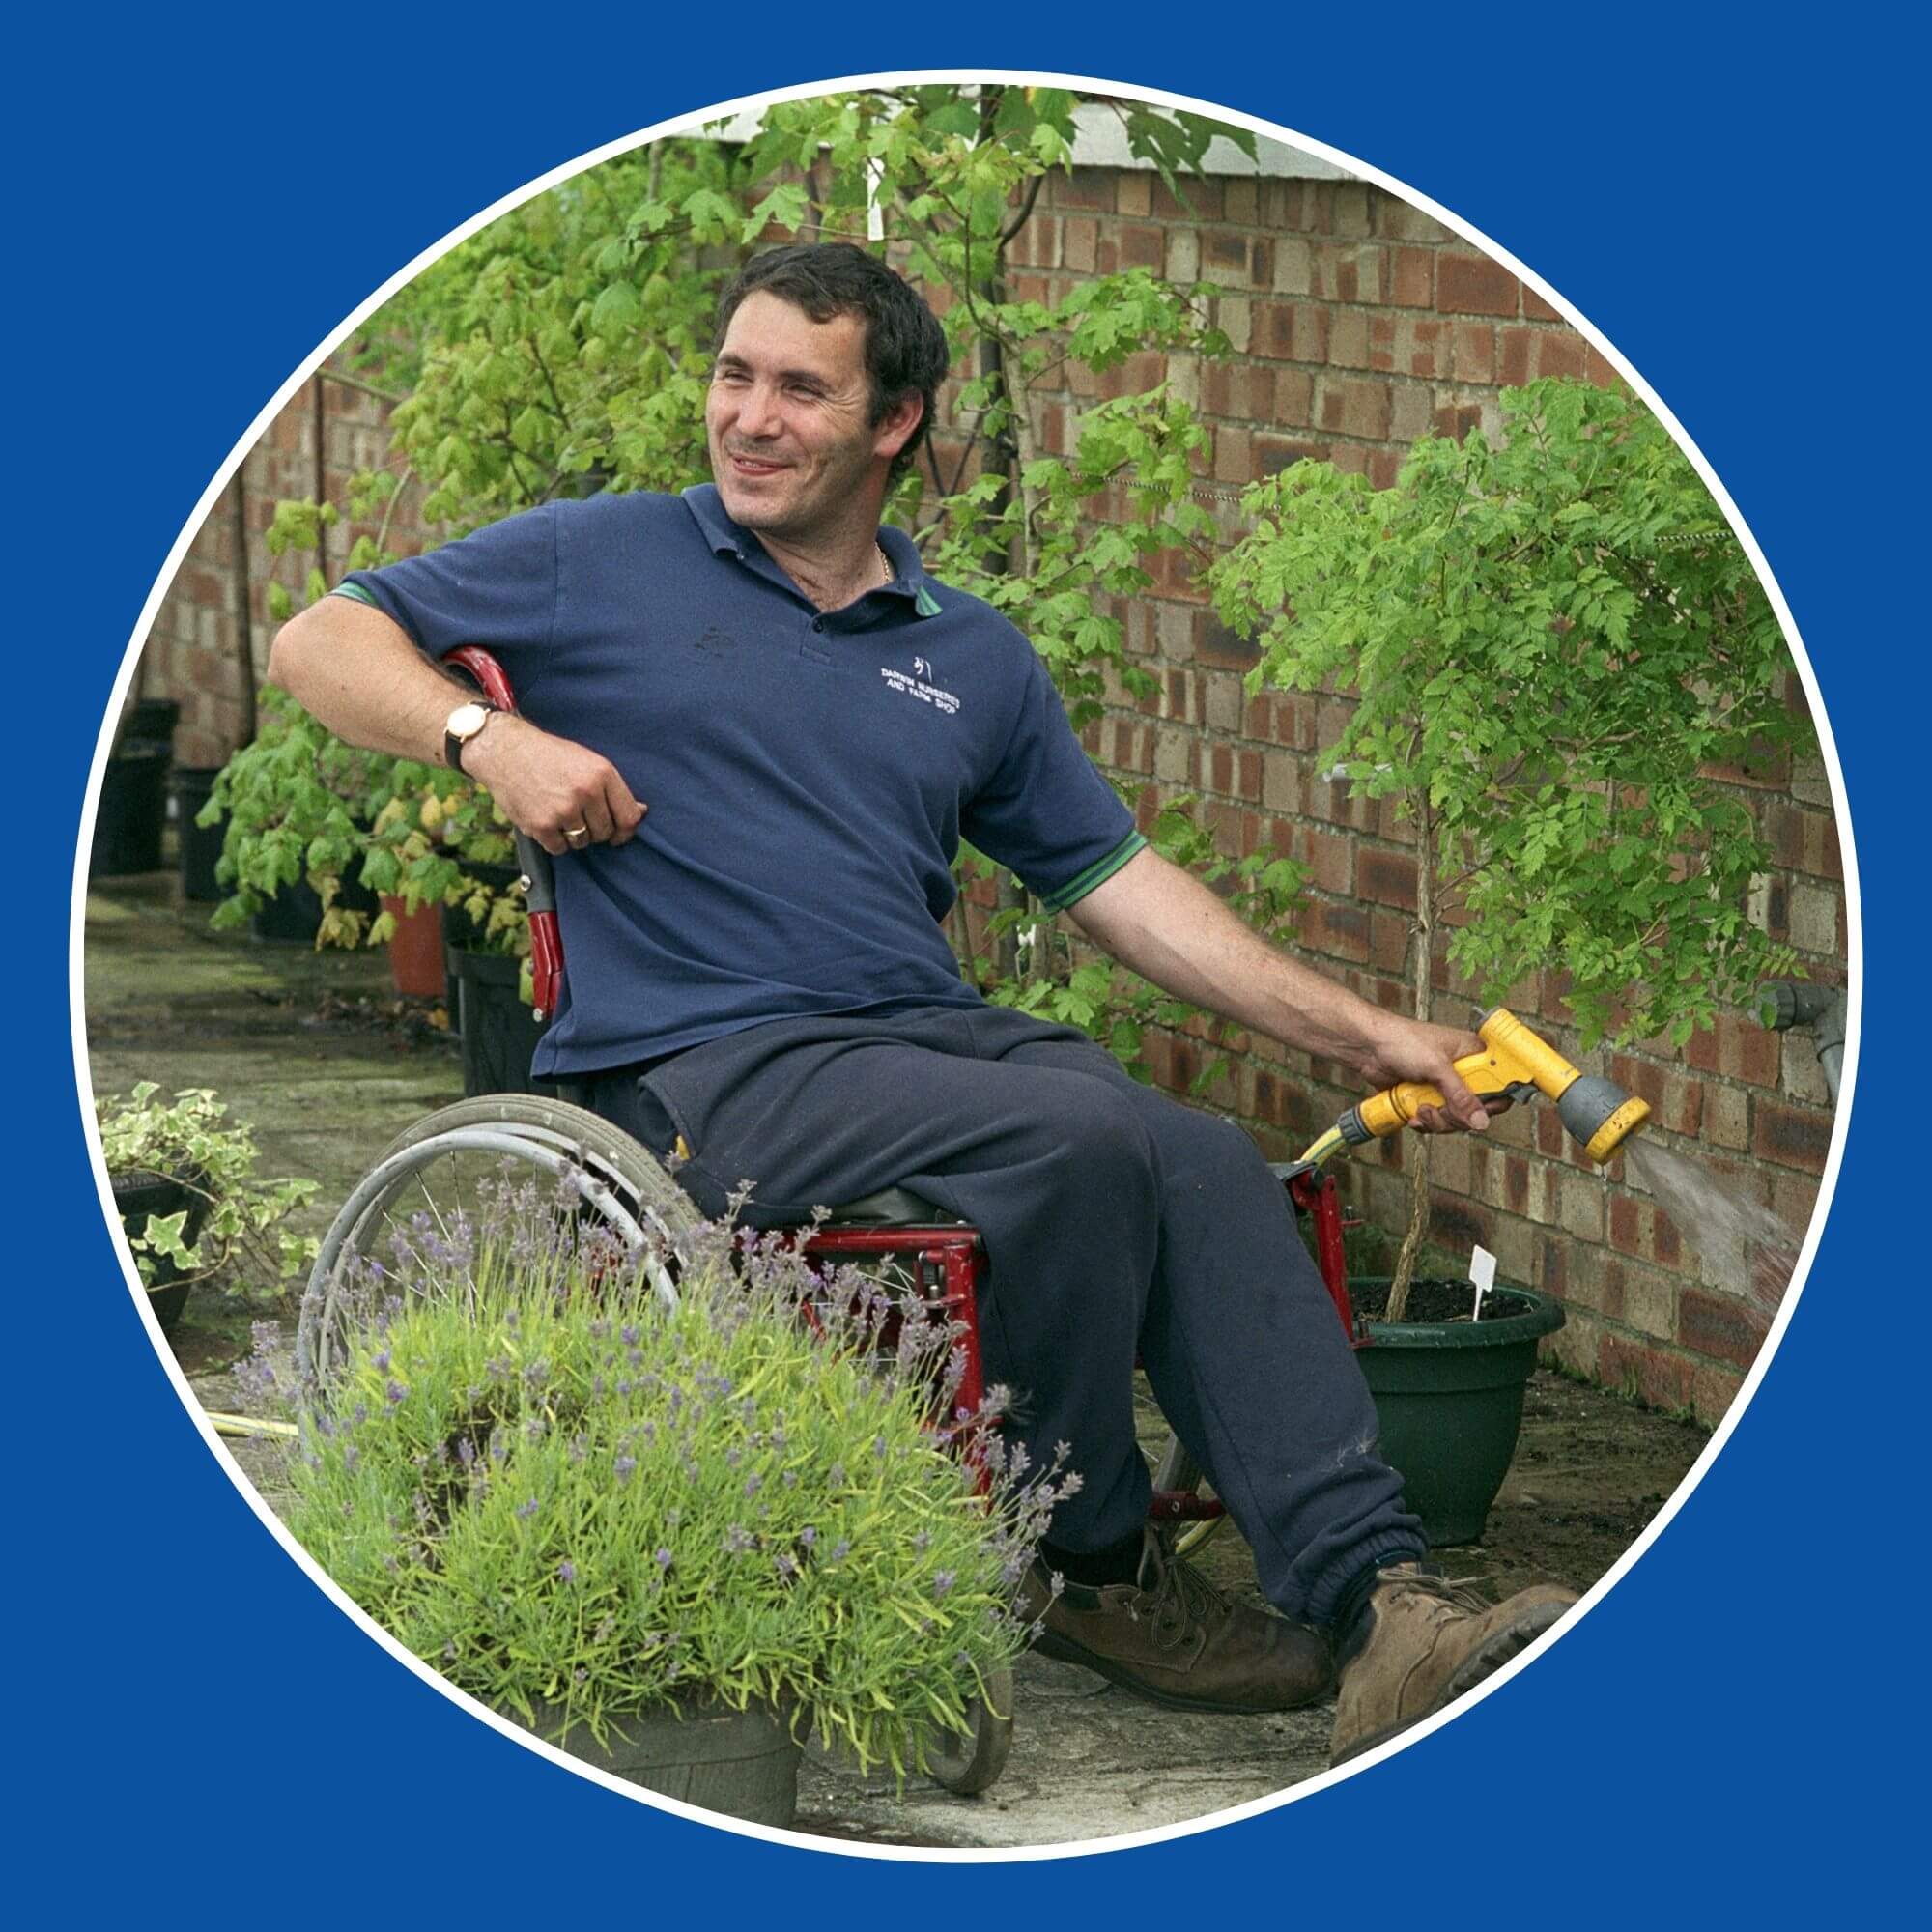 The photo shows a man in a wheelchair in his garden watering the plants